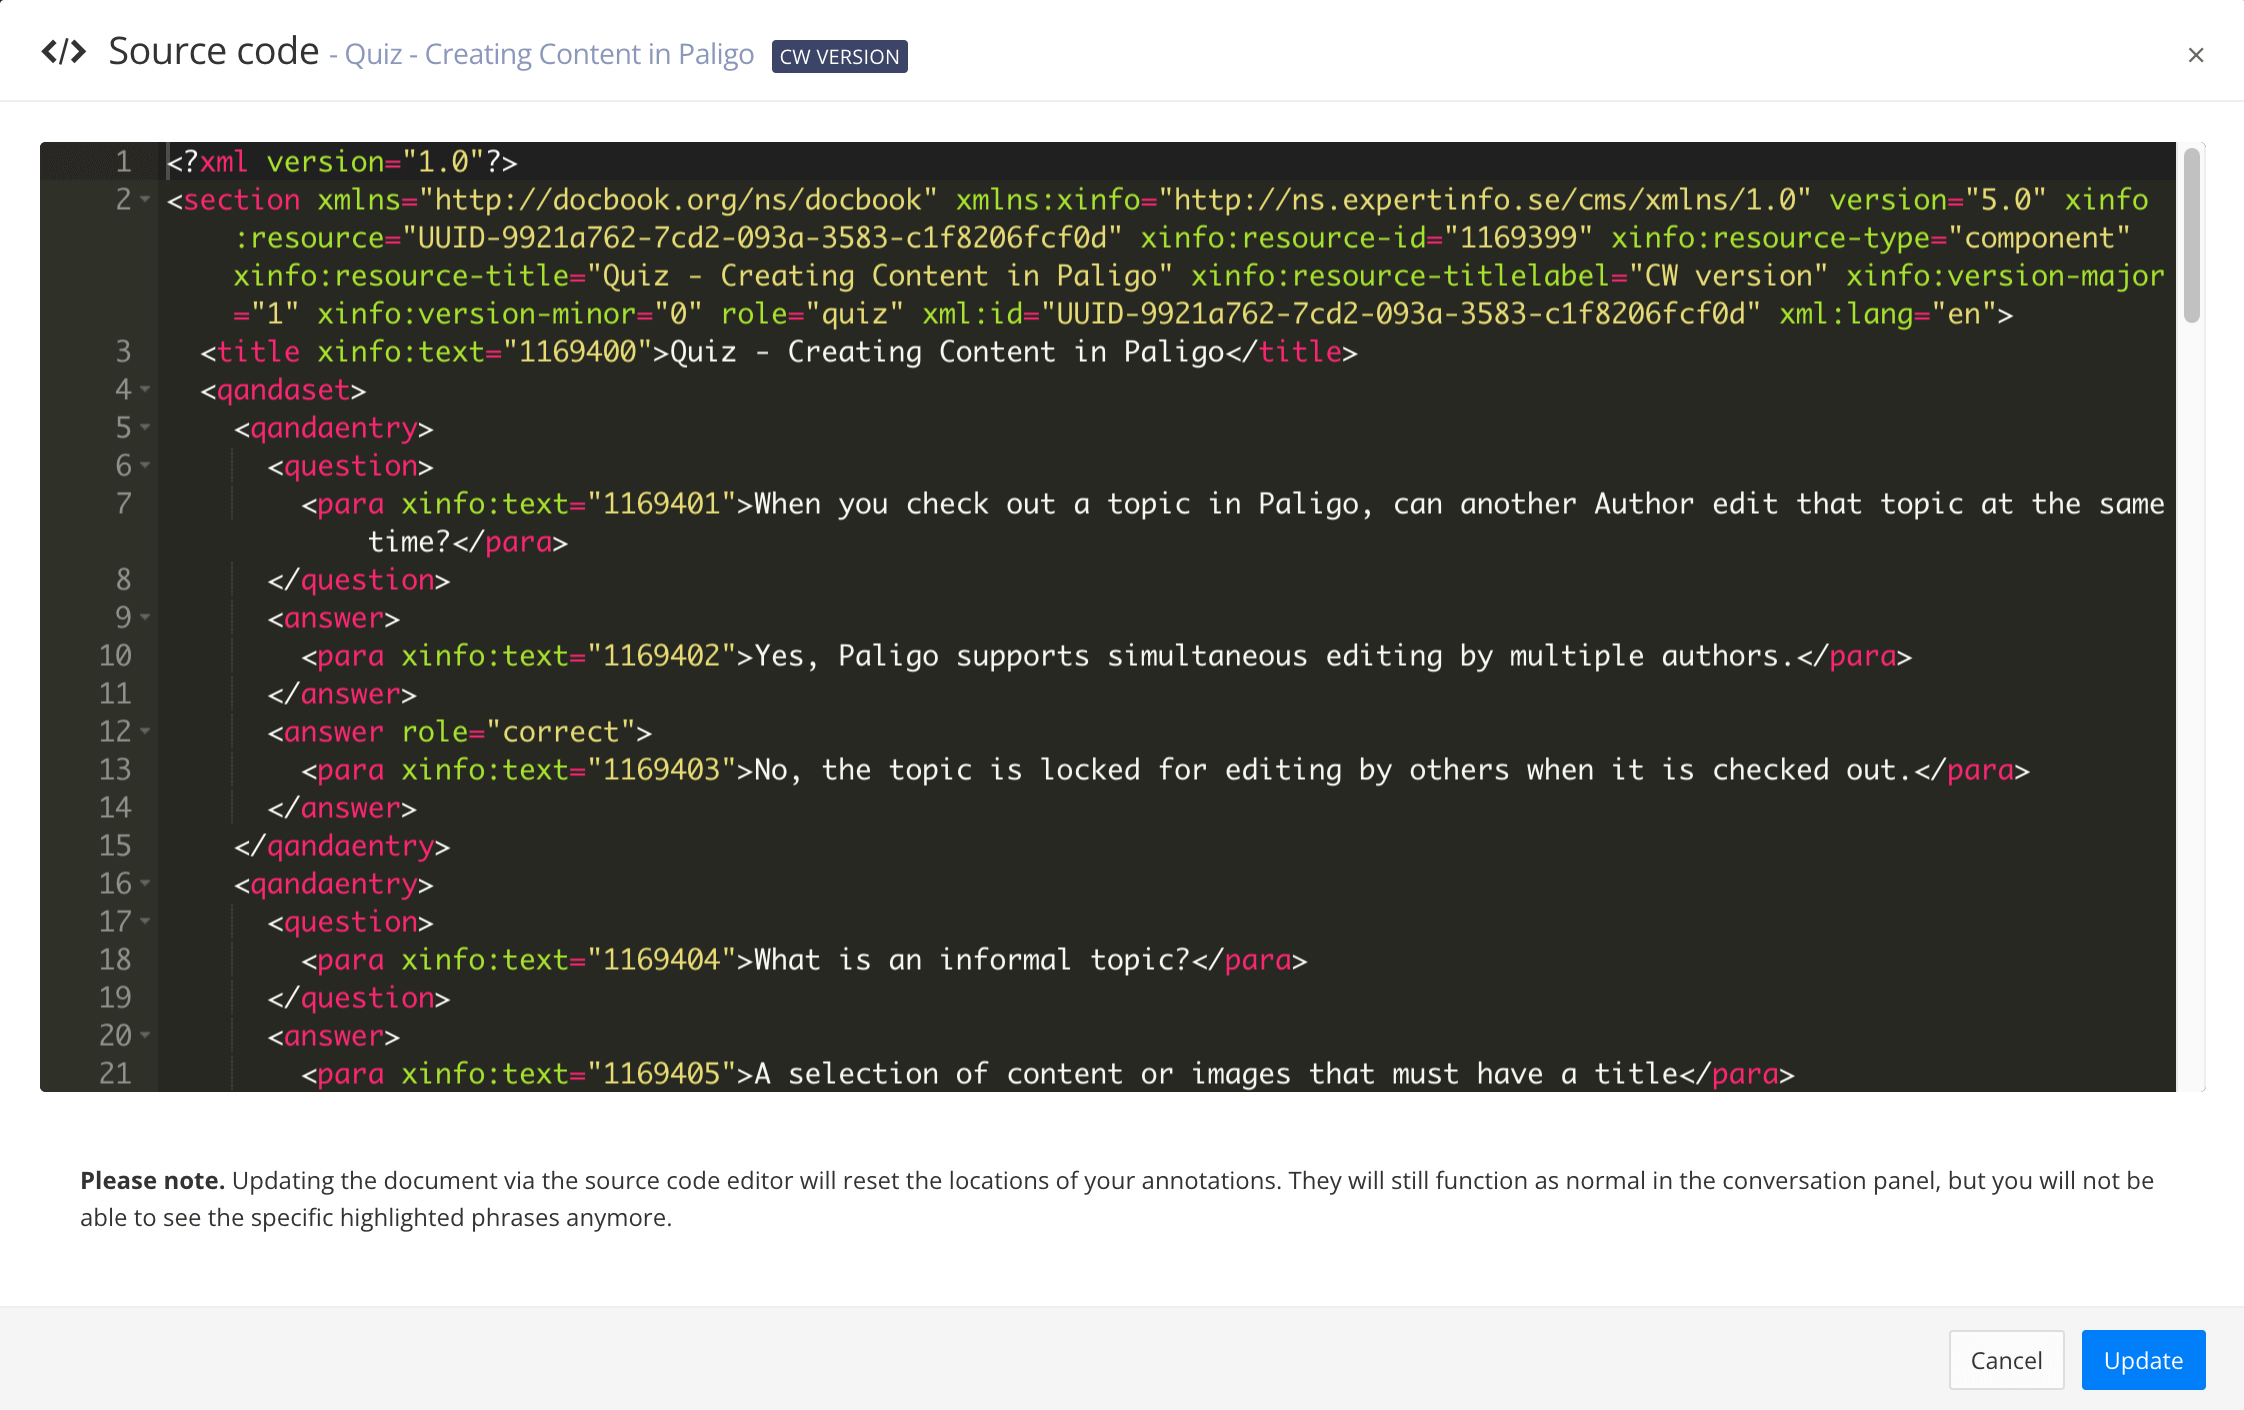 source code editor set to use the monokai theme. It has a black background with code in cerise, yellow, green and white.